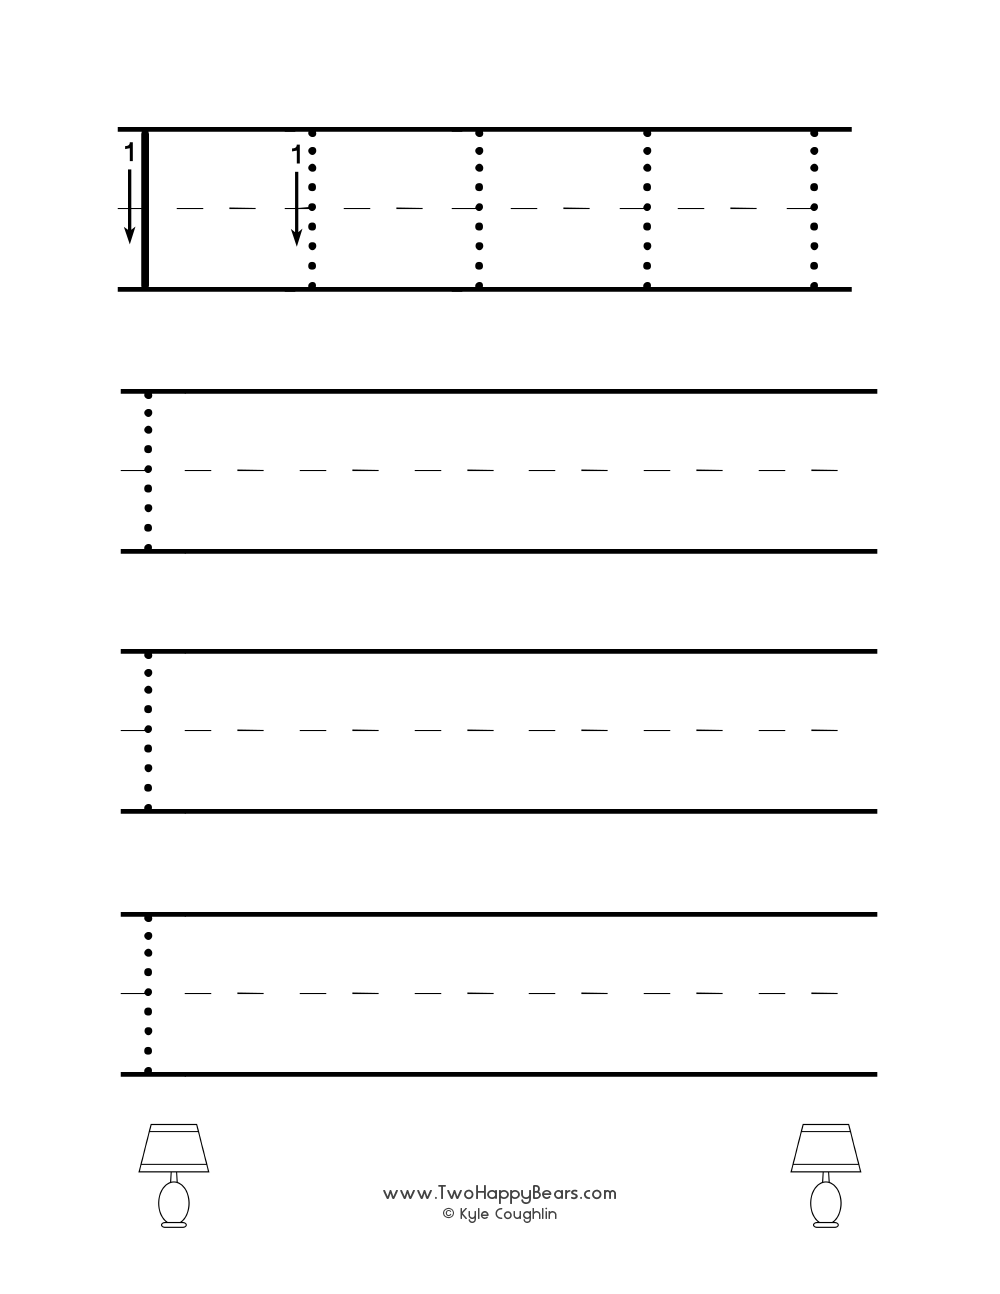 Worksheet for tracing and writing the lowercase letter L, in free printable PDF format.